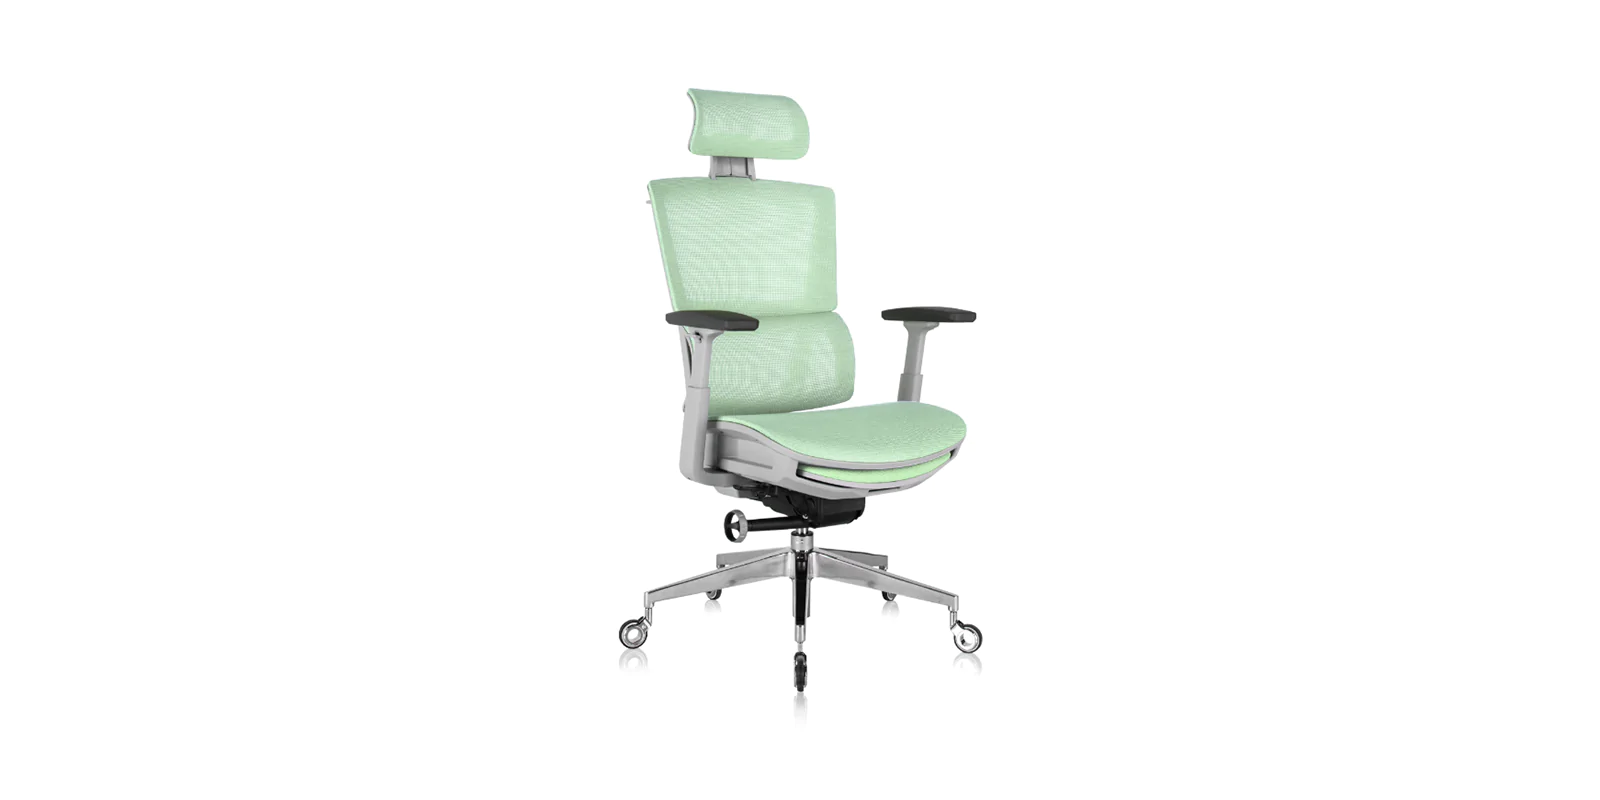 What are the best ergonomic office chairs?